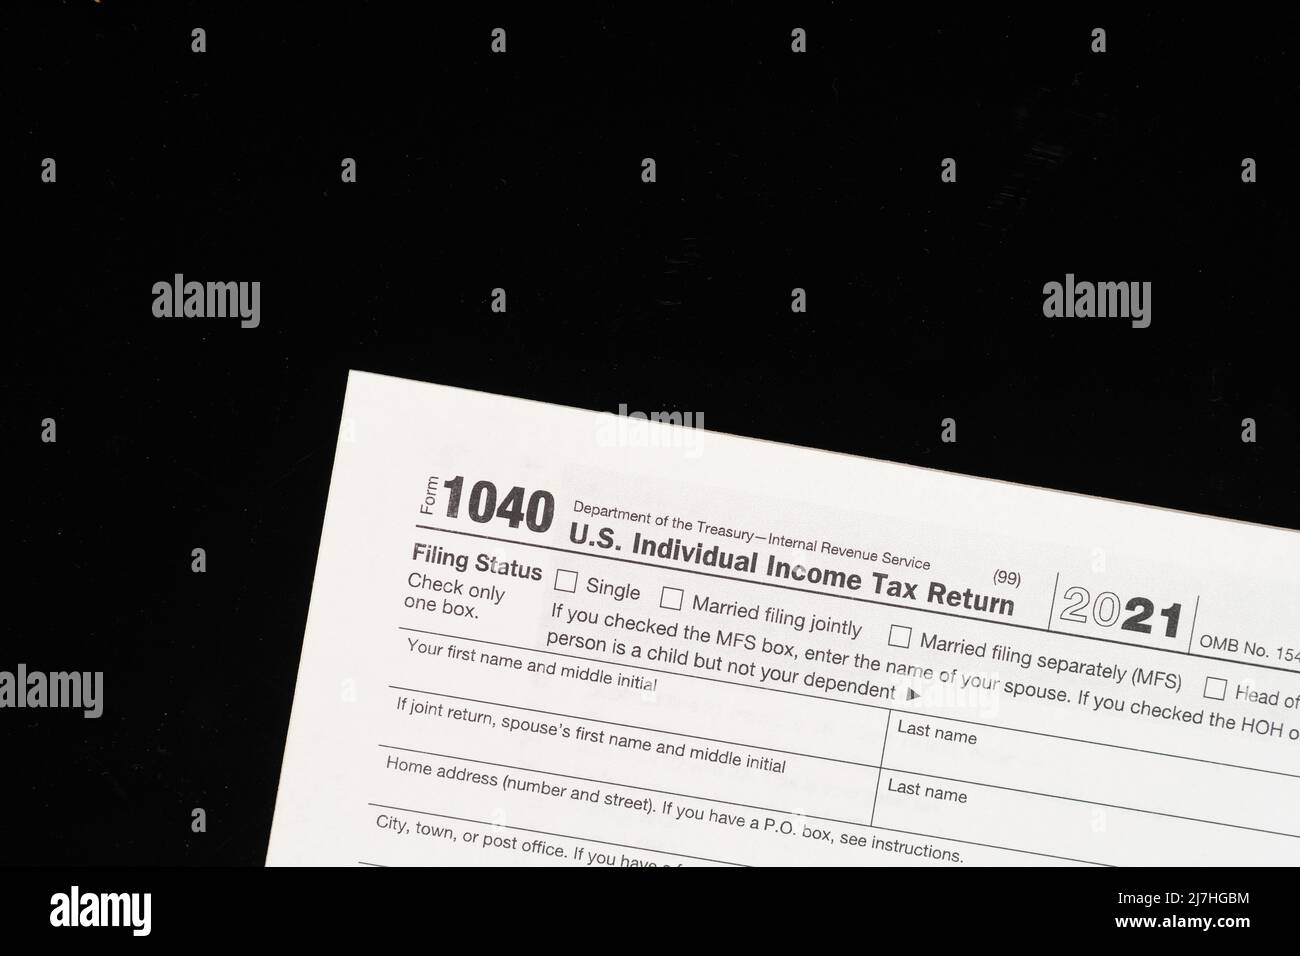 US Internal Revenue Service IRS taxpayer form 1040 for personal income tax filing isolated on black background Stock Photo